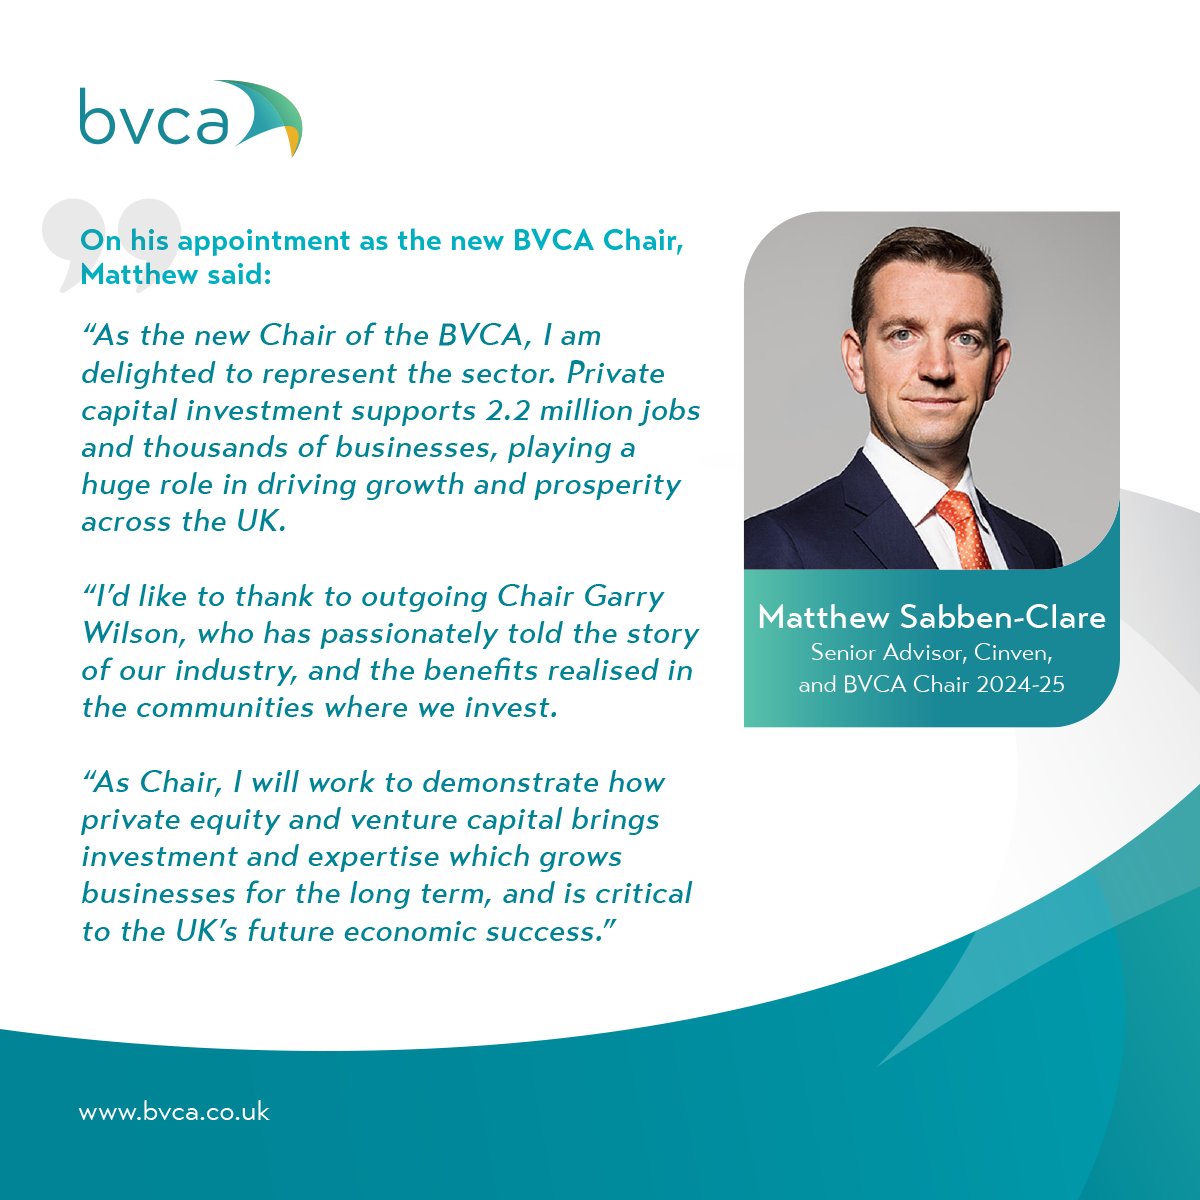 The BVCA is pleased to announce Matthew Sabben-Clare as the Chair of its Council, the association’s board of directors. Matthew is a Senior Advisor to Cinven. Previously, he was Head of Cinven’s Capital Markets team and Chief Administrative Officer. Prior to his roles at Cinven,…